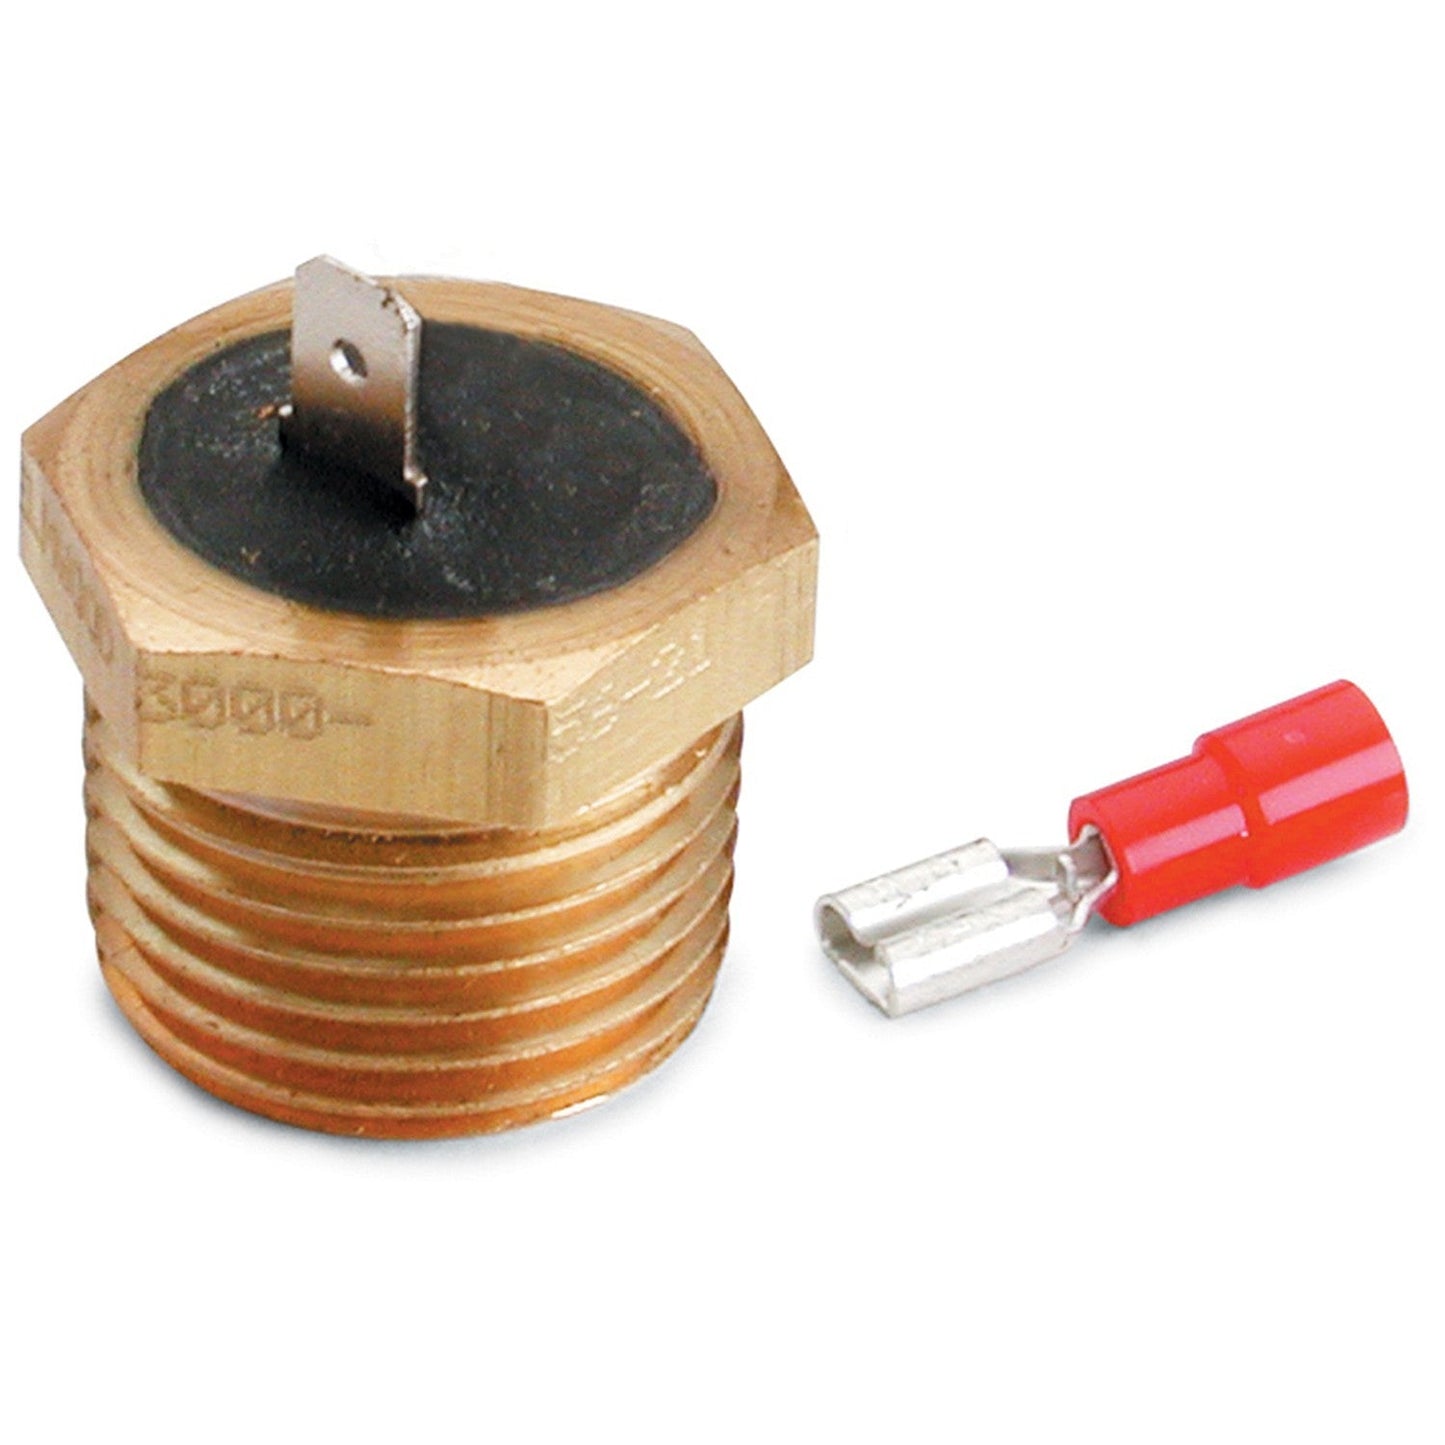 AutoMeter - TEMPERATURE SWITCH, 220 °F, 1/2" NPTF MALE, FOR PRO-LITE WARNING LIGHT (3247)